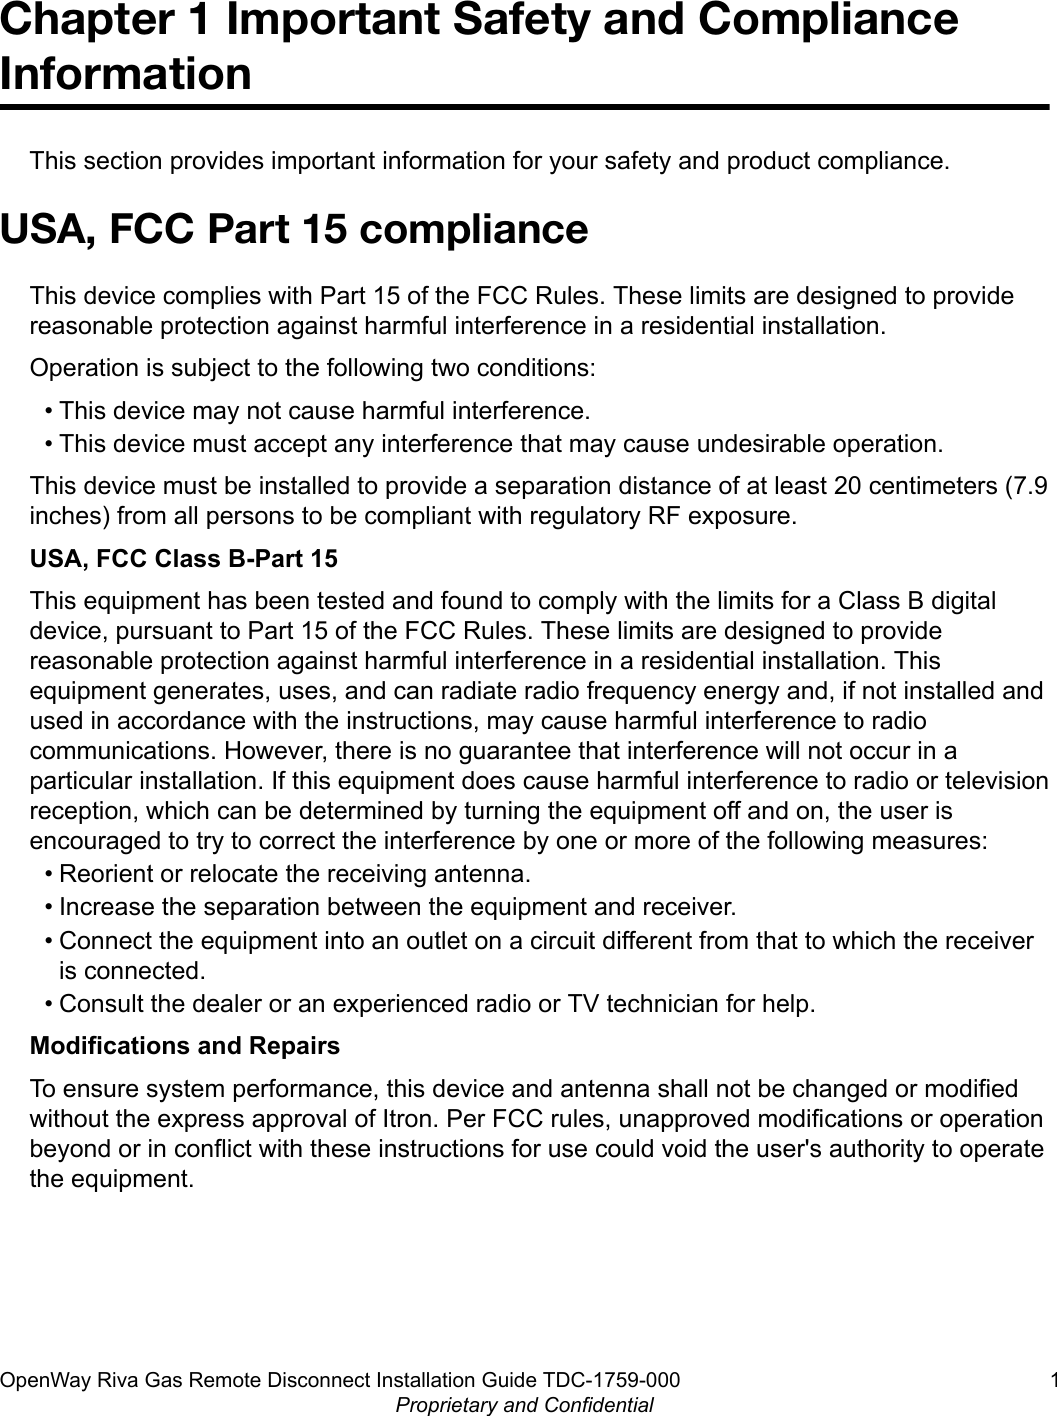 Chapter 1 Important Safety and ComplianceInformationThis section provides important information for your safety and product compliance.USA, FCC Part 15 complianceThis device complies with Part 15 of the FCC Rules. These limits are designed to providereasonable protection against harmful interference in a residential installation.Operation is subject to the following two conditions:• This device may not cause harmful interference.• This device must accept any interference that may cause undesirable operation.This device must be installed to provide a separation distance of at least 20 centimeters (7.9inches) from all persons to be compliant with regulatory RF exposure.USA, FCC Class B-Part 15This equipment has been tested and found to comply with the limits for a Class B digitaldevice, pursuant to Part 15 of the FCC Rules. These limits are designed to providereasonable protection against harmful interference in a residential installation. Thisequipment generates, uses, and can radiate radio frequency energy and, if not installed andused in accordance with the instructions, may cause harmful interference to radiocommunications. However, there is no guarantee that interference will not occur in aparticular installation. If this equipment does cause harmful interference to radio or televisionreception, which can be determined by turning the equipment off and on, the user isencouraged to try to correct the interference by one or more of the following measures:• Reorient or relocate the receiving antenna.• Increase the separation between the equipment and receiver.• Connect the equipment into an outlet on a circuit different from that to which the receiveris connected.• Consult the dealer or an experienced radio or TV technician for help.Modifications and RepairsTo ensure system performance, this device and antenna shall not be changed or modifiedwithout the express approval of Itron. Per FCC rules, unapproved modifications or operationbeyond or in conflict with these instructions for use could void the user&apos;s authority to operatethe equipment.OpenWay Riva Gas Remote Disconnect Installation Guide TDC-1759-000 1Proprietary and Confidential